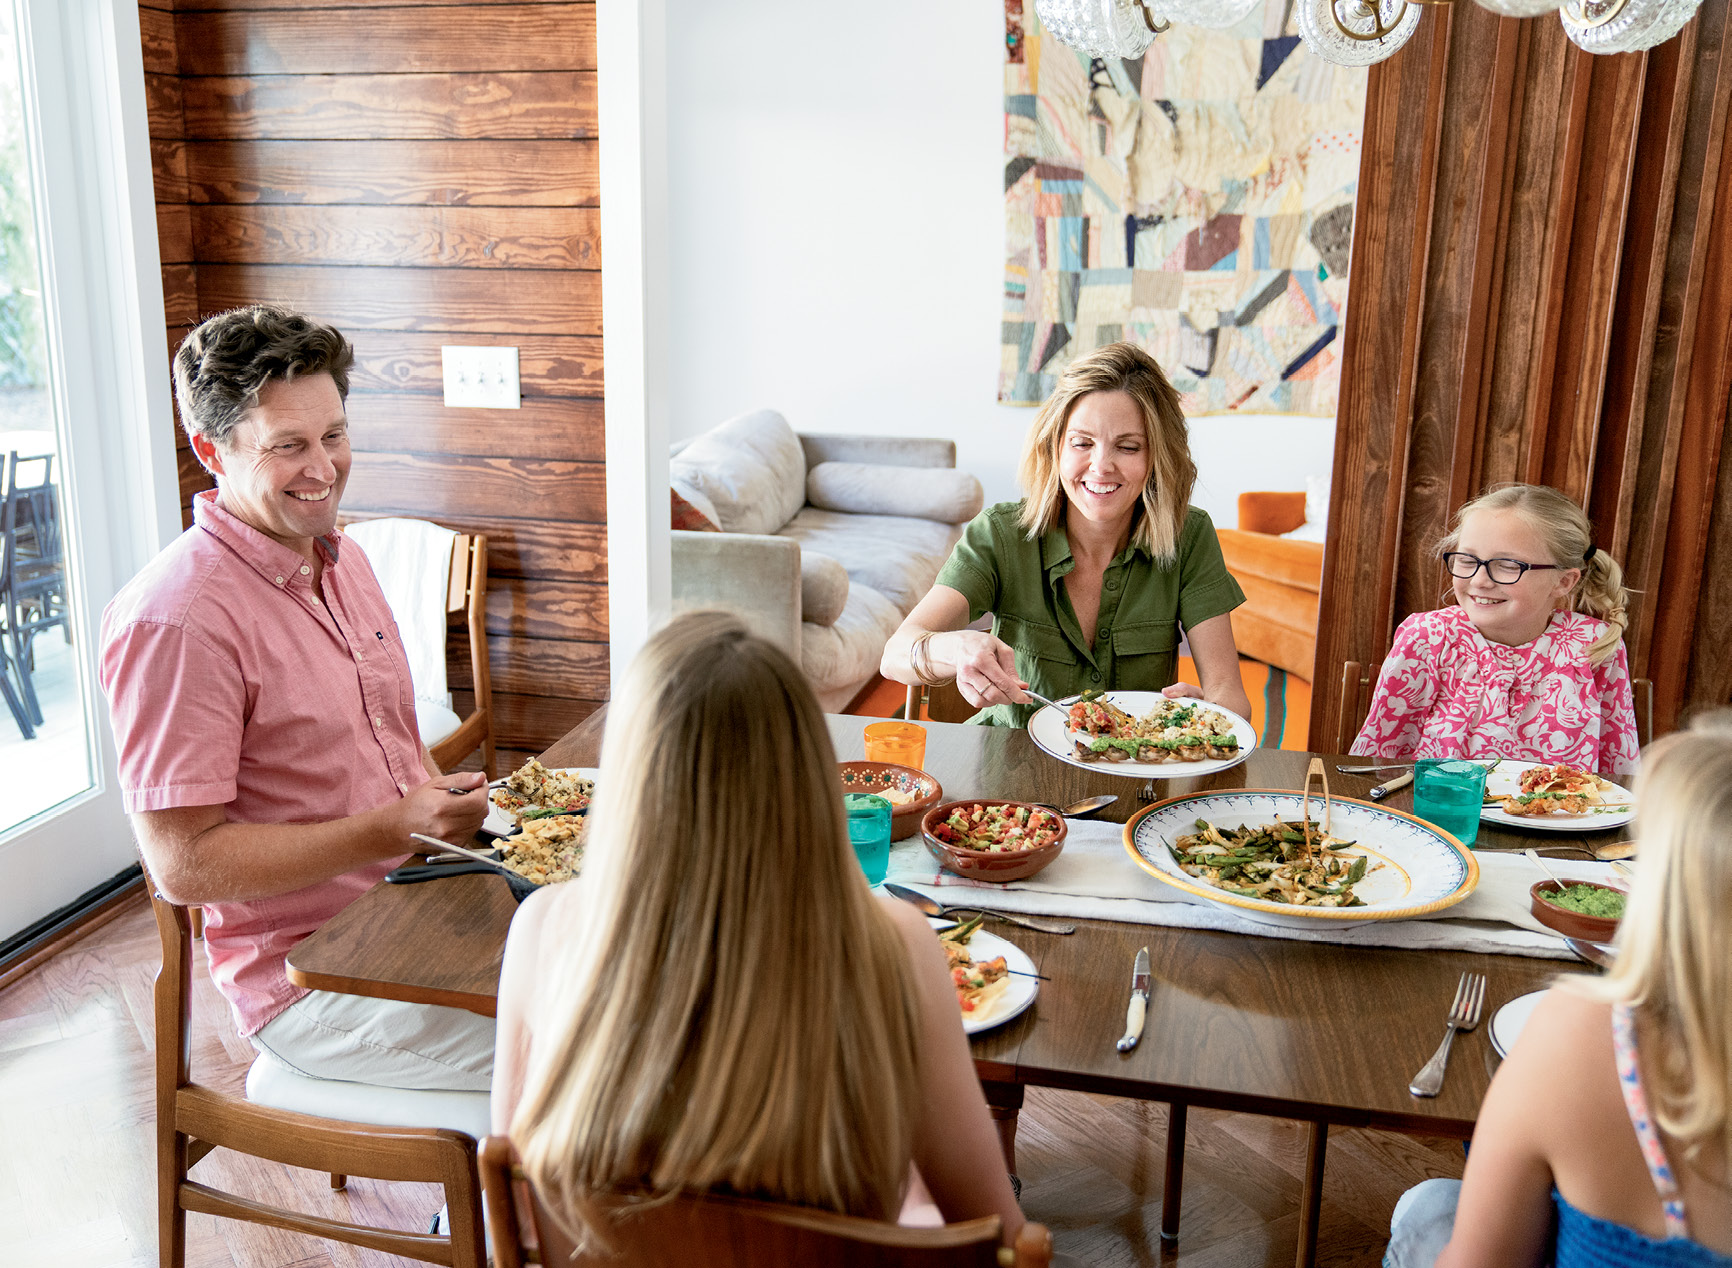 On Sundays, the Moreys make a point of gathering around the table for supper and conversation. This tradition helps the busy family unwind and reconnect before the start of the week.